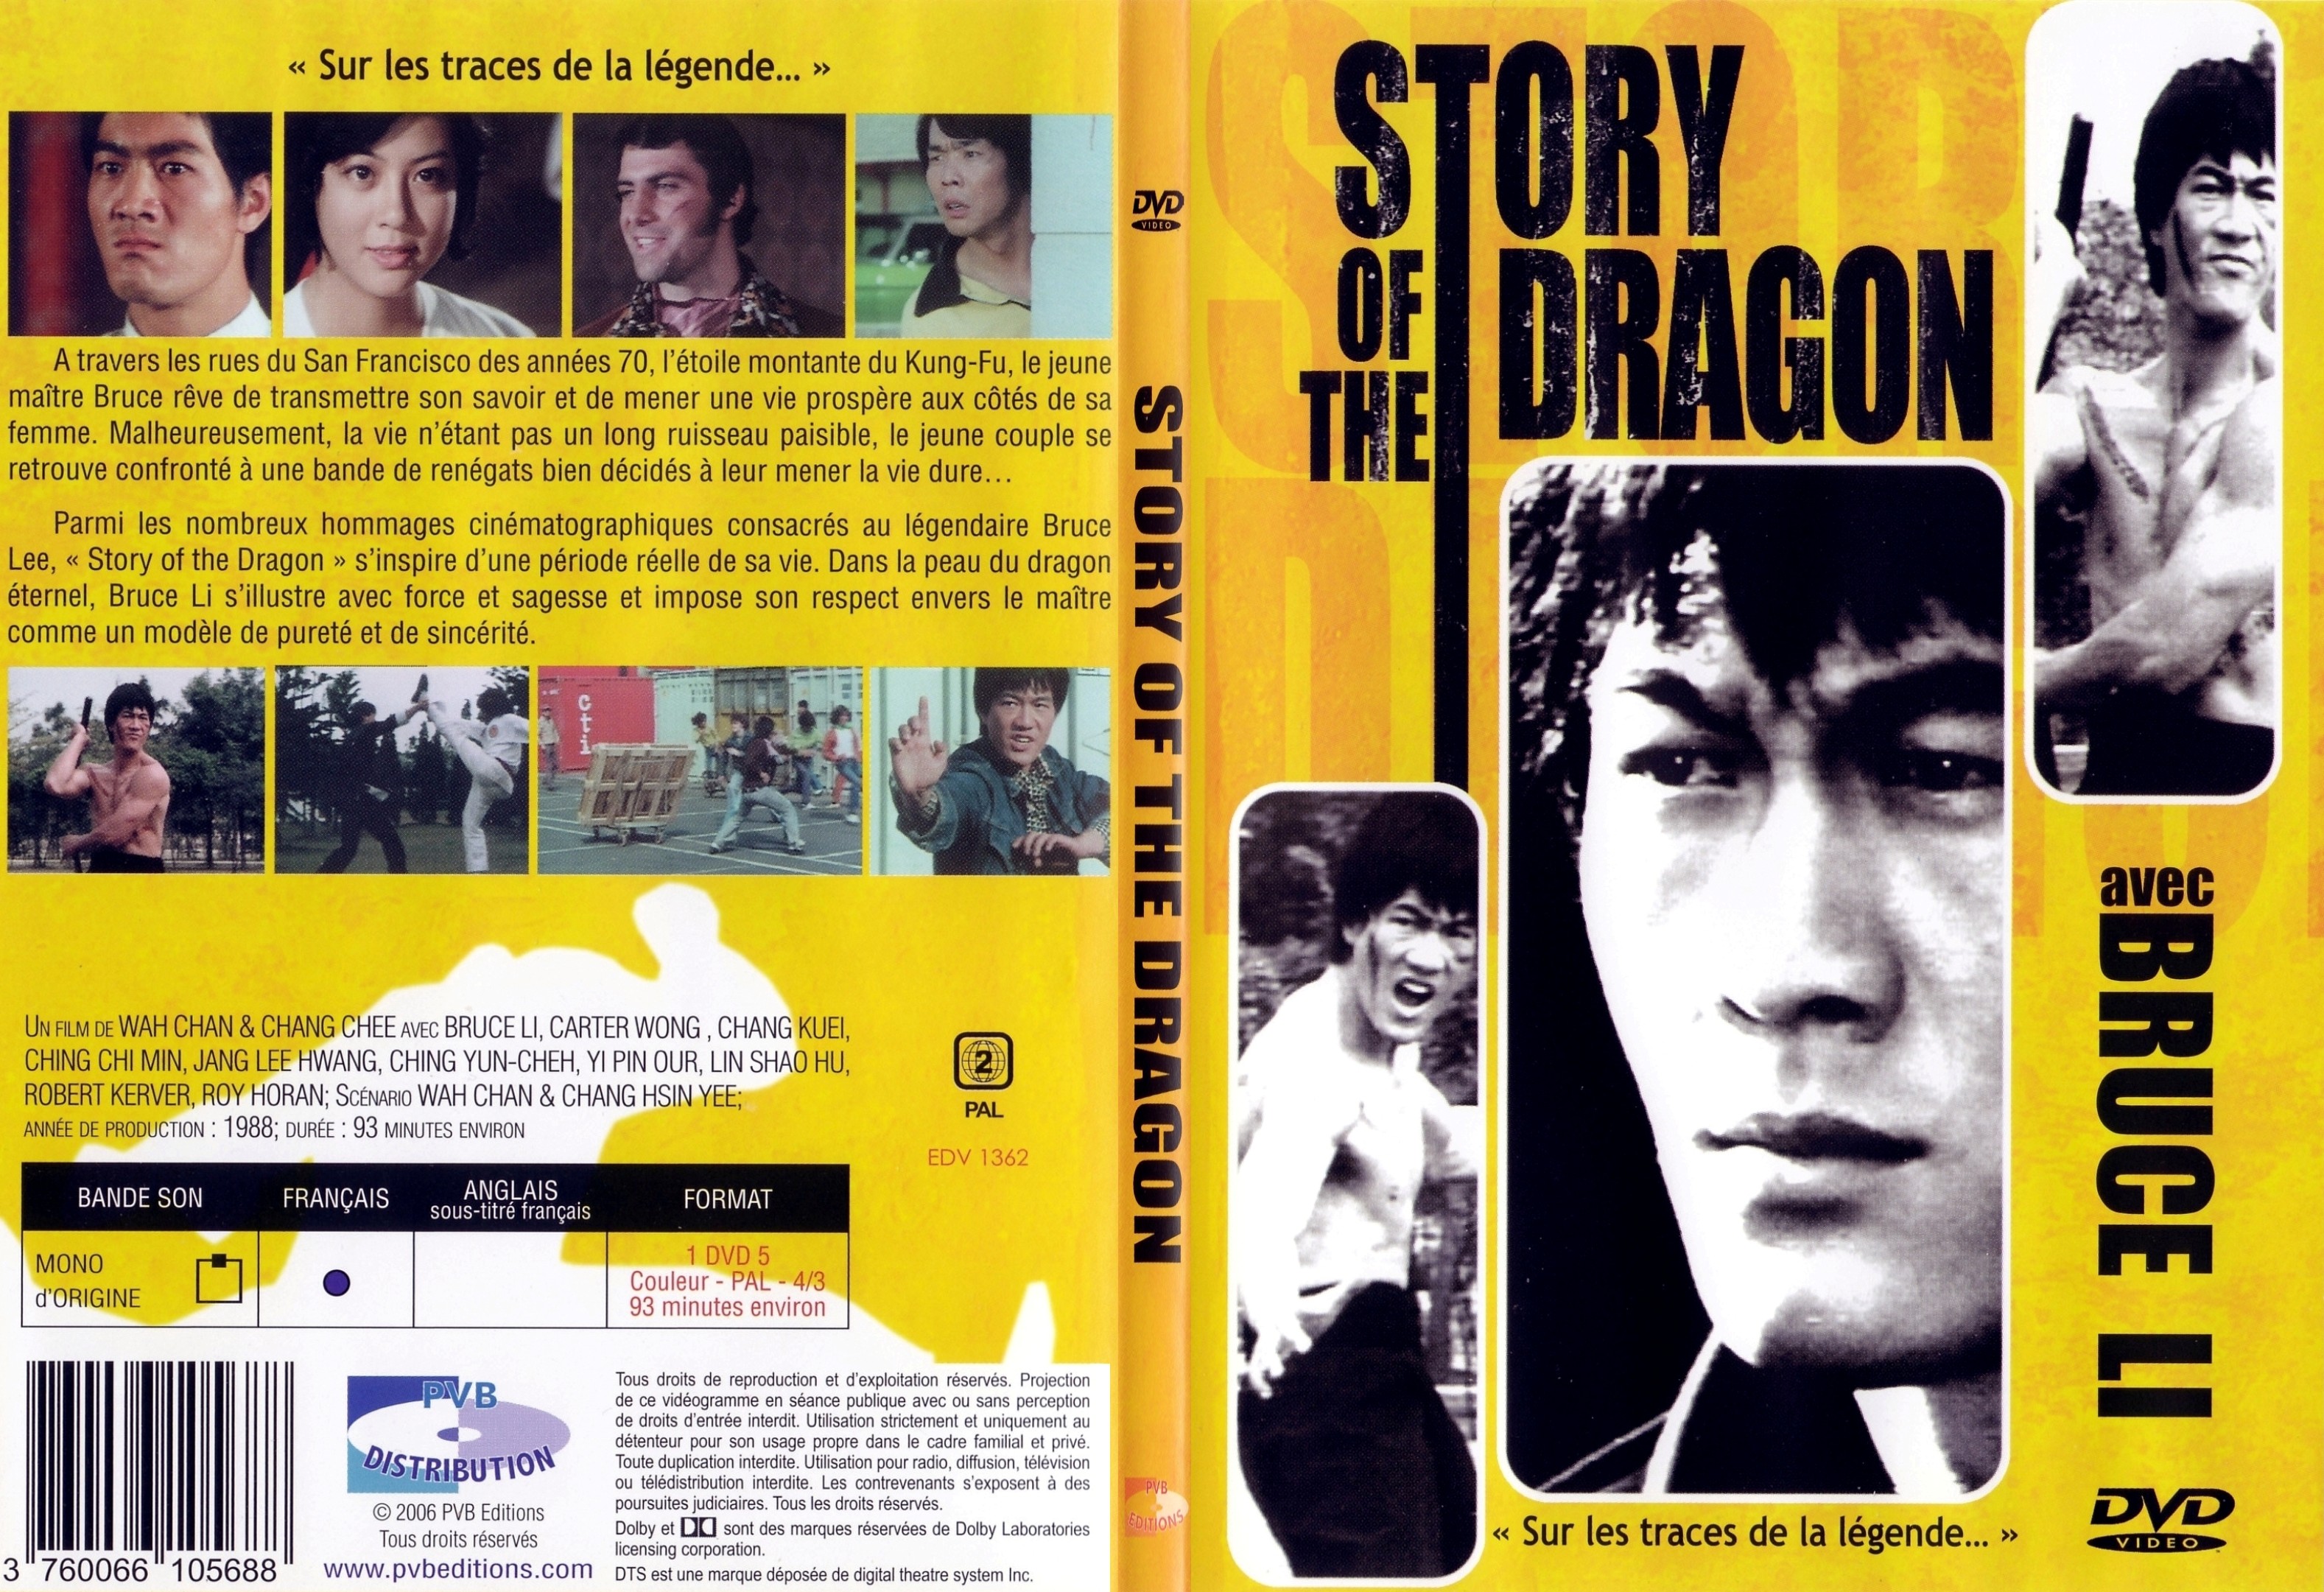 Jaquette DVD Story of the dragon - SLIM